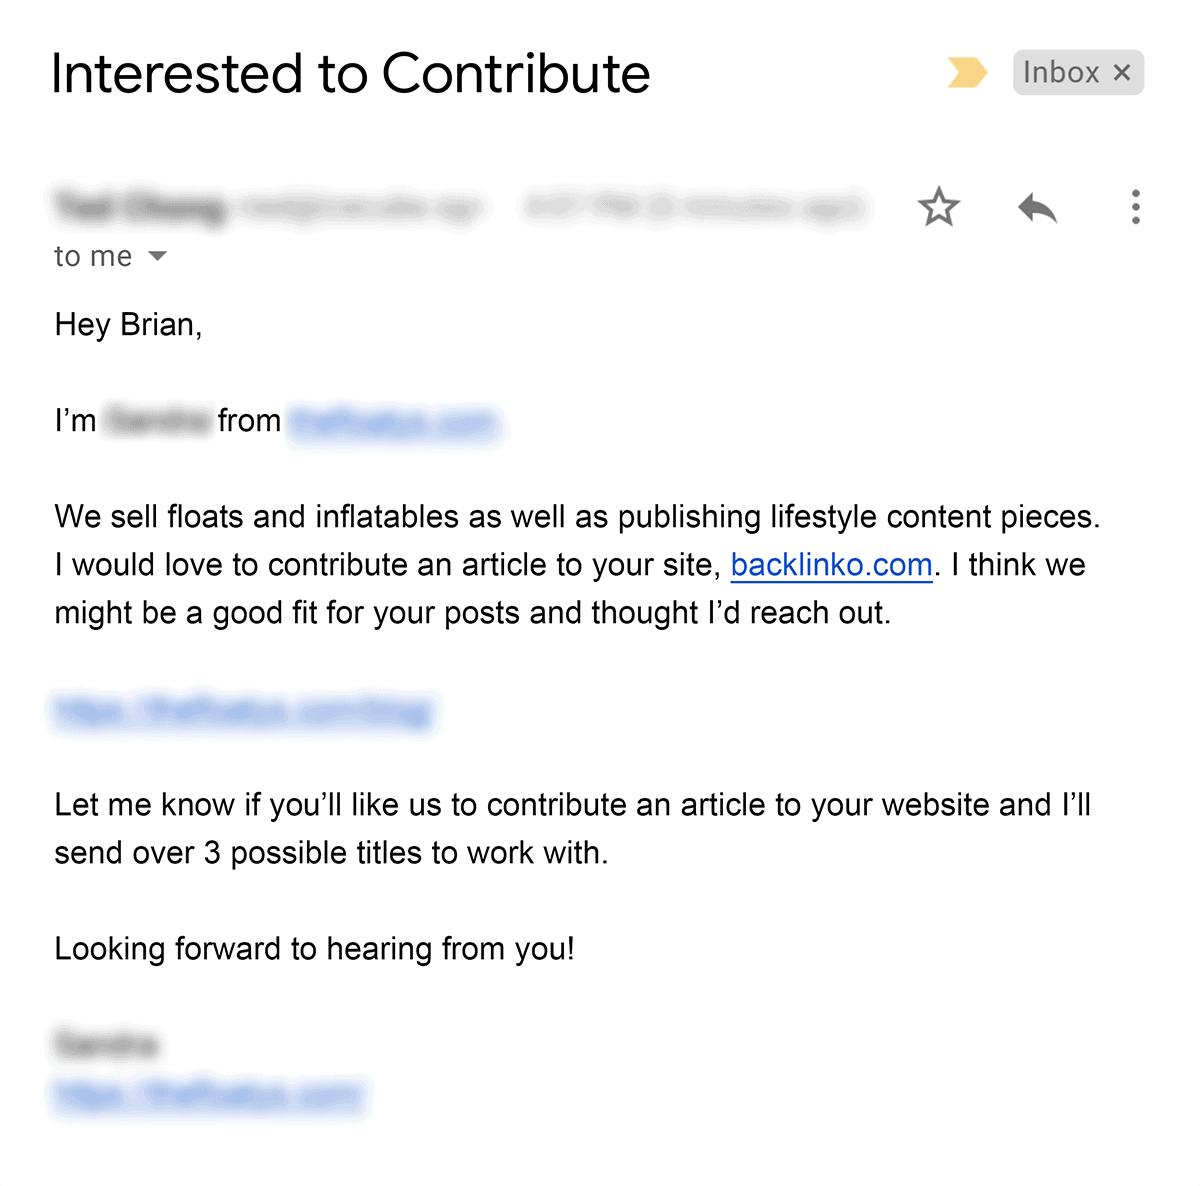 Outreach email meant for someone else